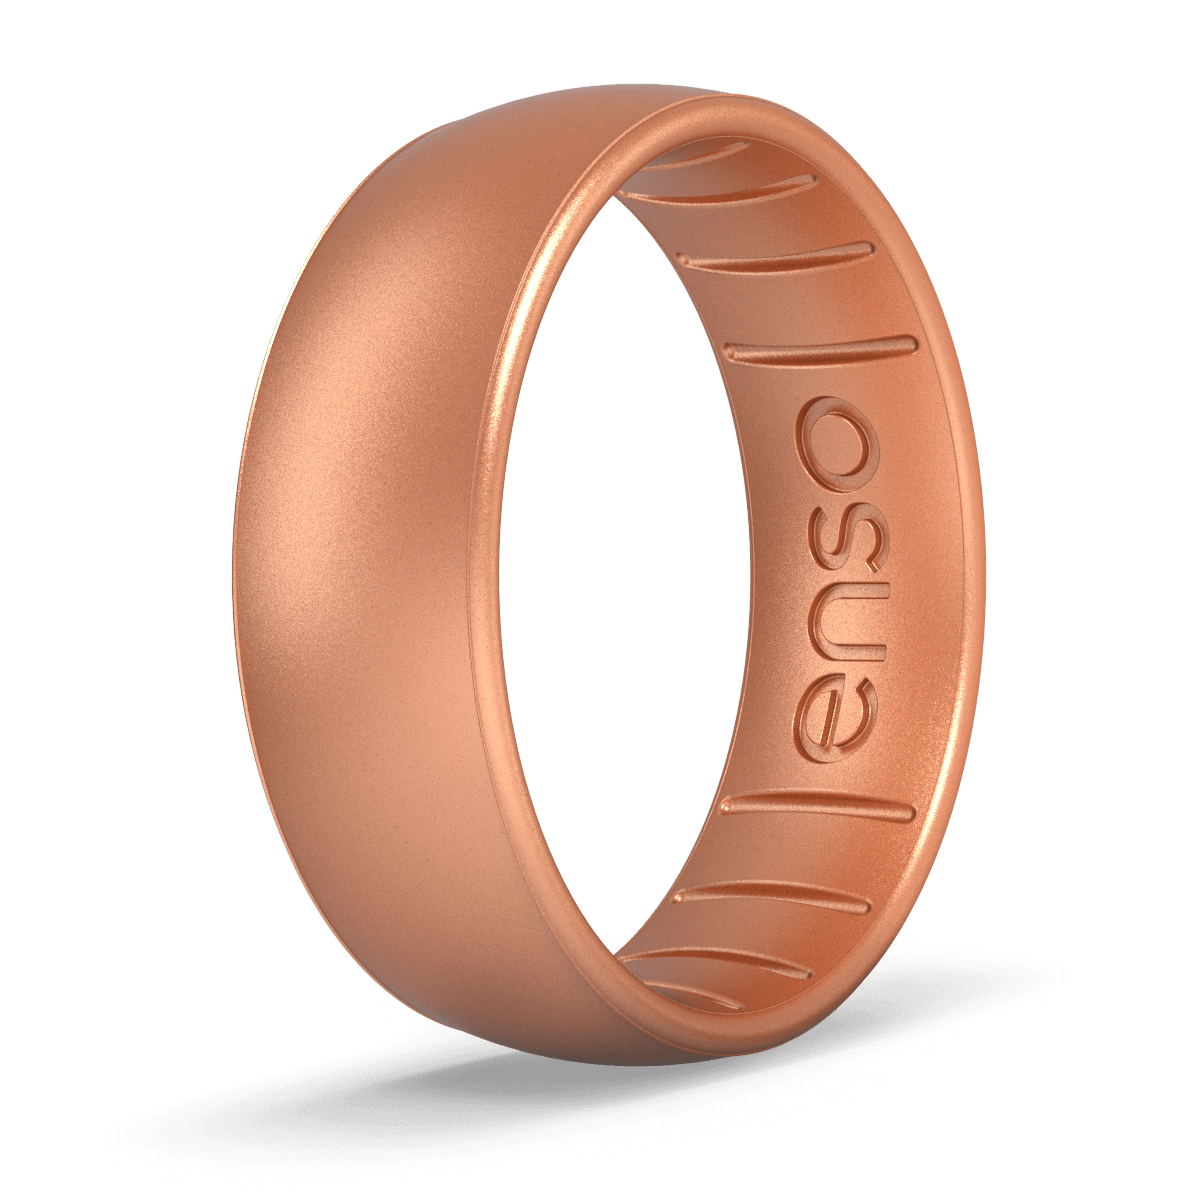 Enso Rings Halo Elements Series Silicone Ring - 8 - Platinum